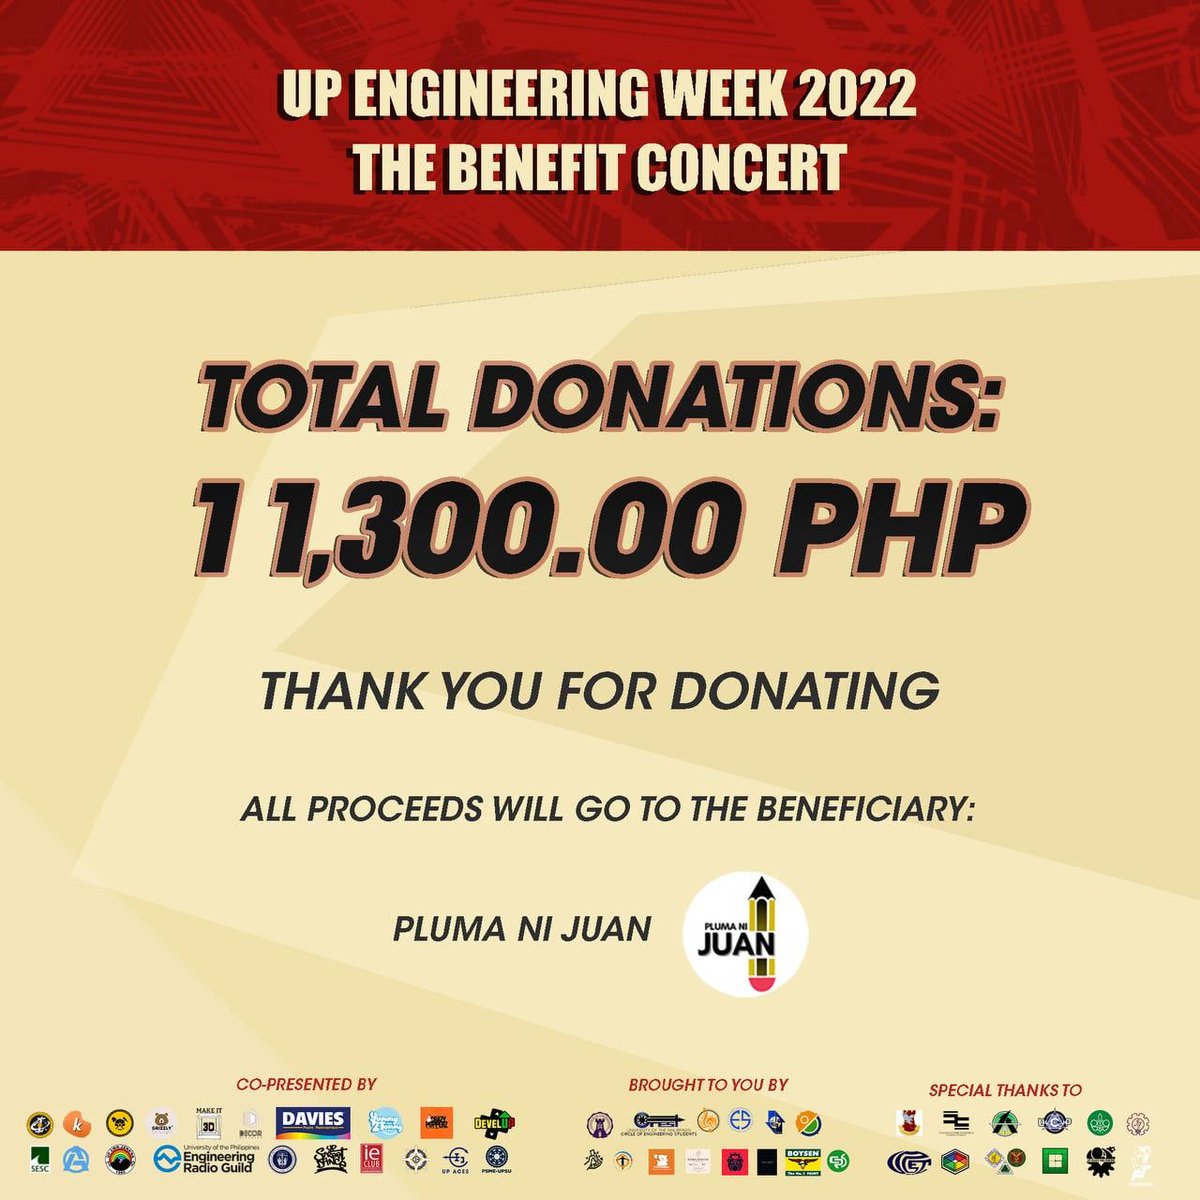 We would like to express our gratitude to everyone who participated and helped via relief and donation drives for pandemic-stricken communities and victims of typhoons through Pluma ni Juan.

We were able to donate a total of 𝟏𝟏,𝟑𝟎𝟎 𝐏𝐇𝐏!

#EW2022
#EnggWeekResurgence